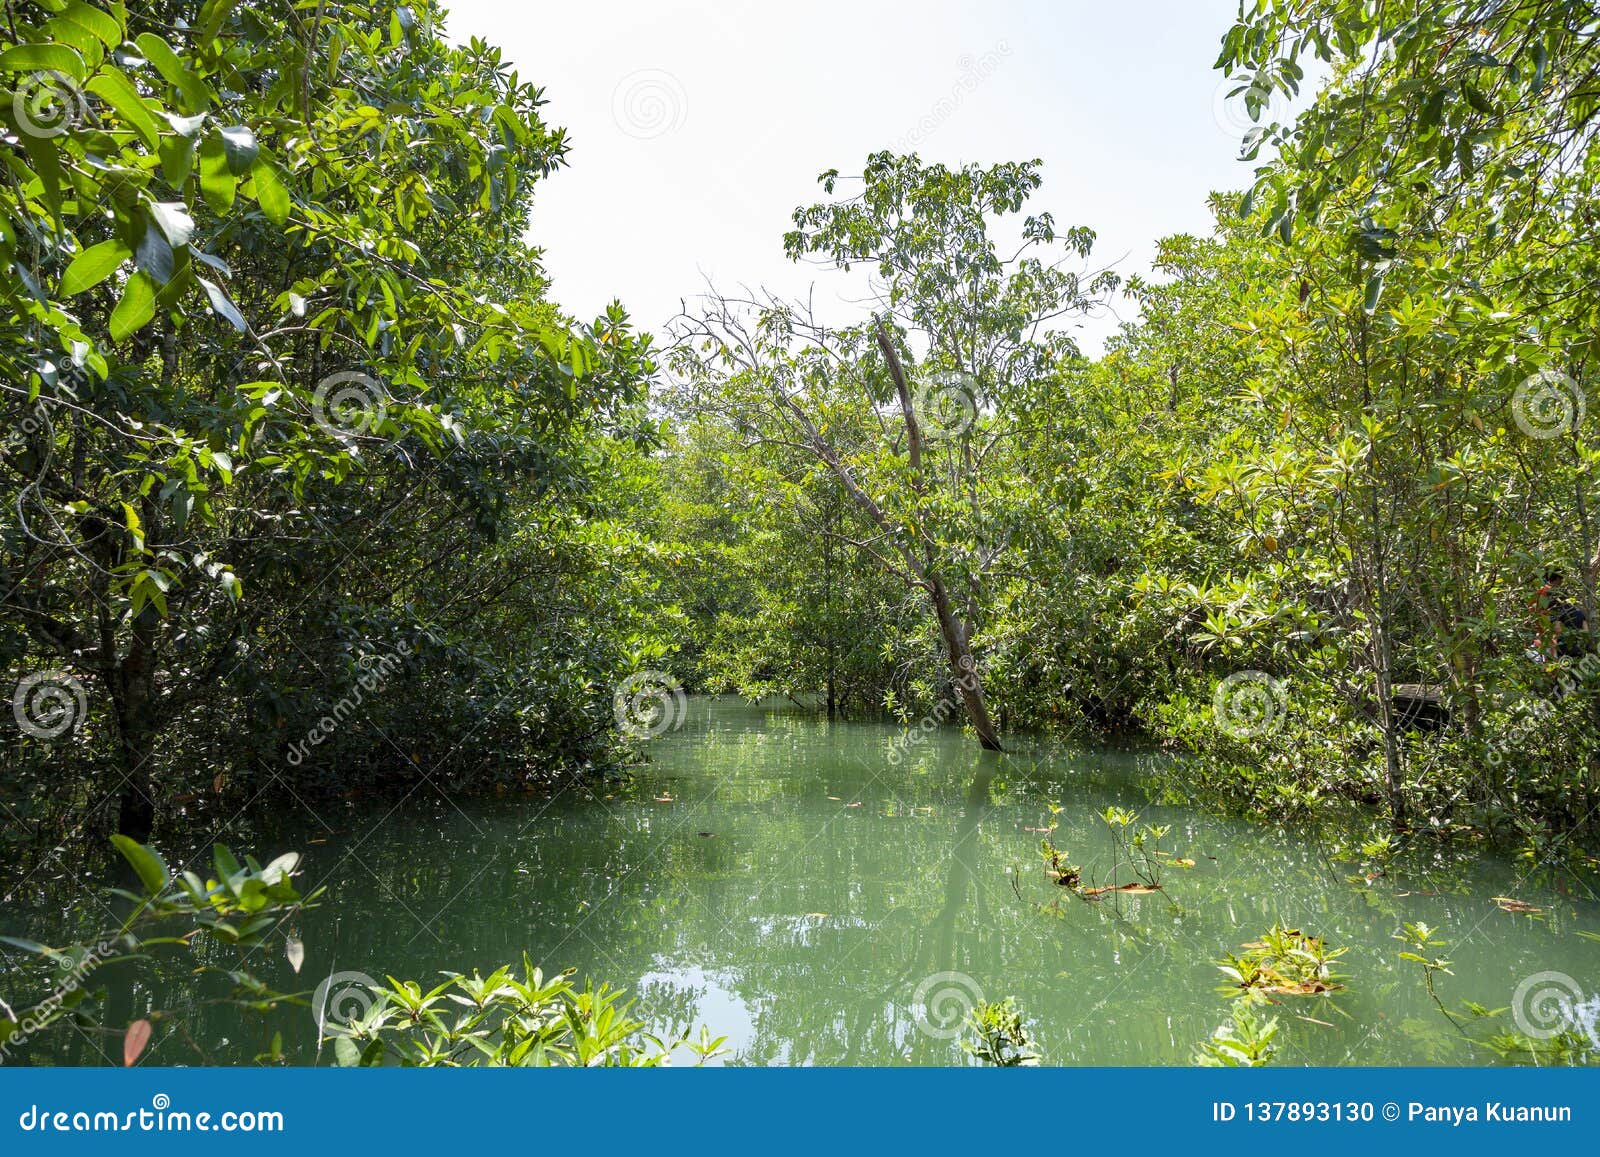 Trees in Lake Rainforest Beautiful Scenery Nature Background Stock ...